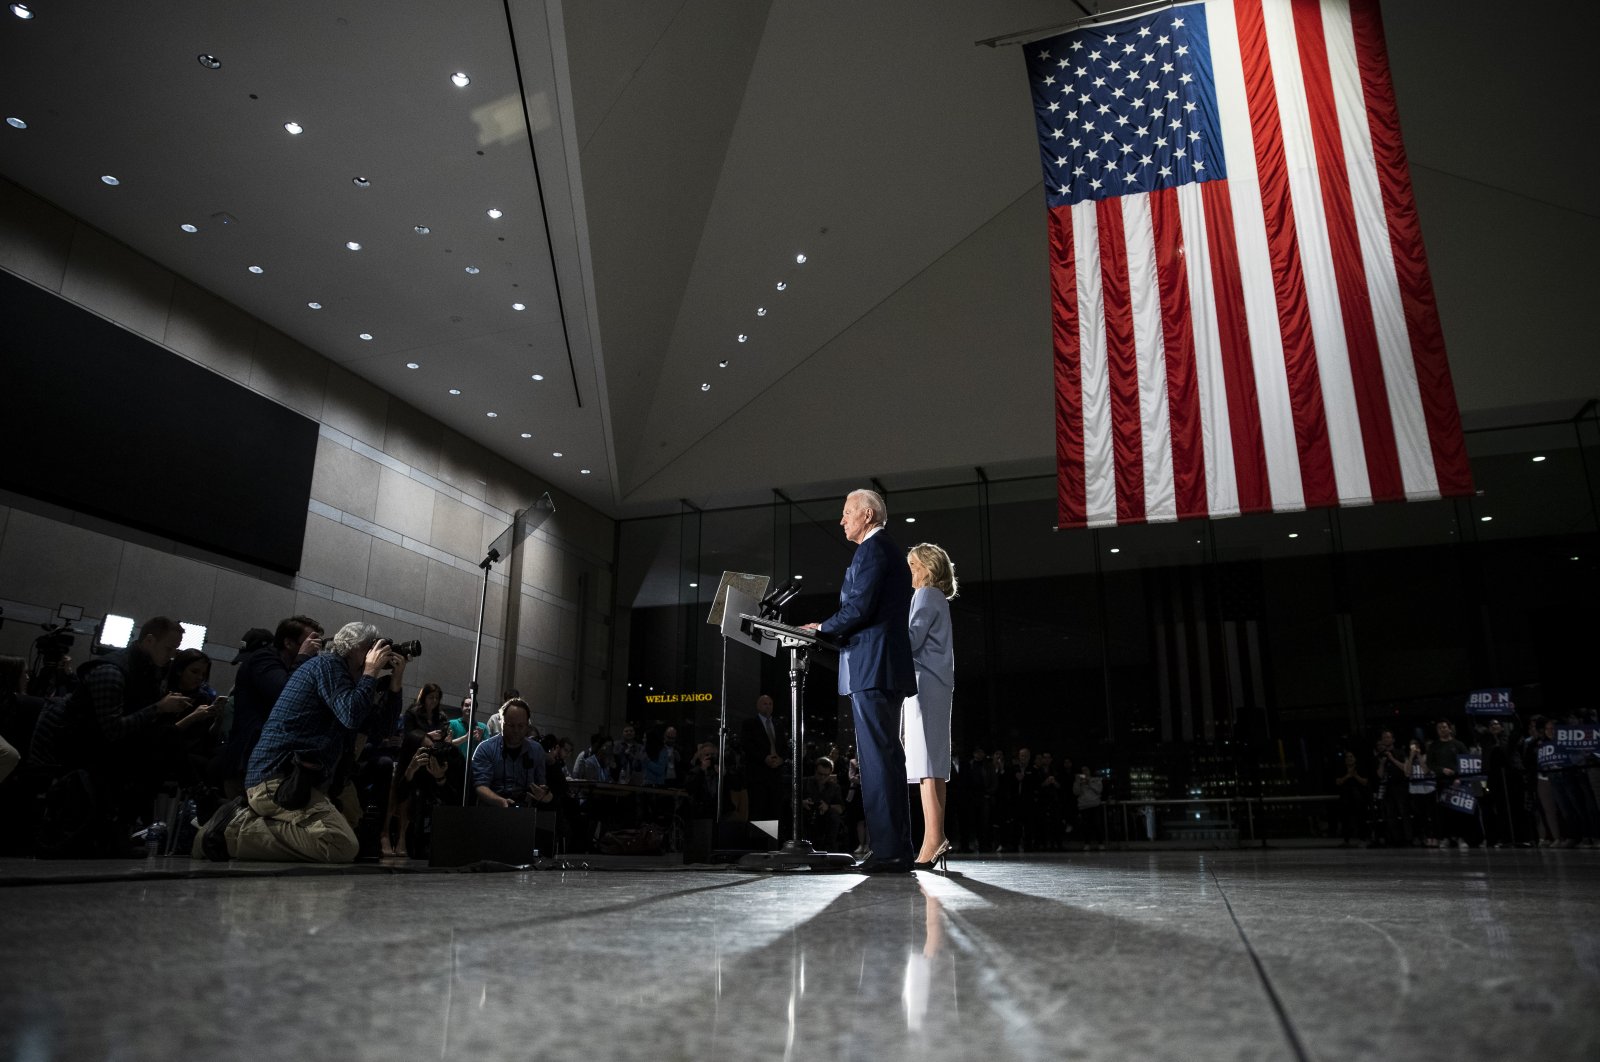 Democratic presidential candidate former Vice President Joe Biden, accompanied by his wife Jill, speaks to members of the press at the National Constitution Center in Philadelphia, Tuesday, March 10, 2020. (AP Photo)